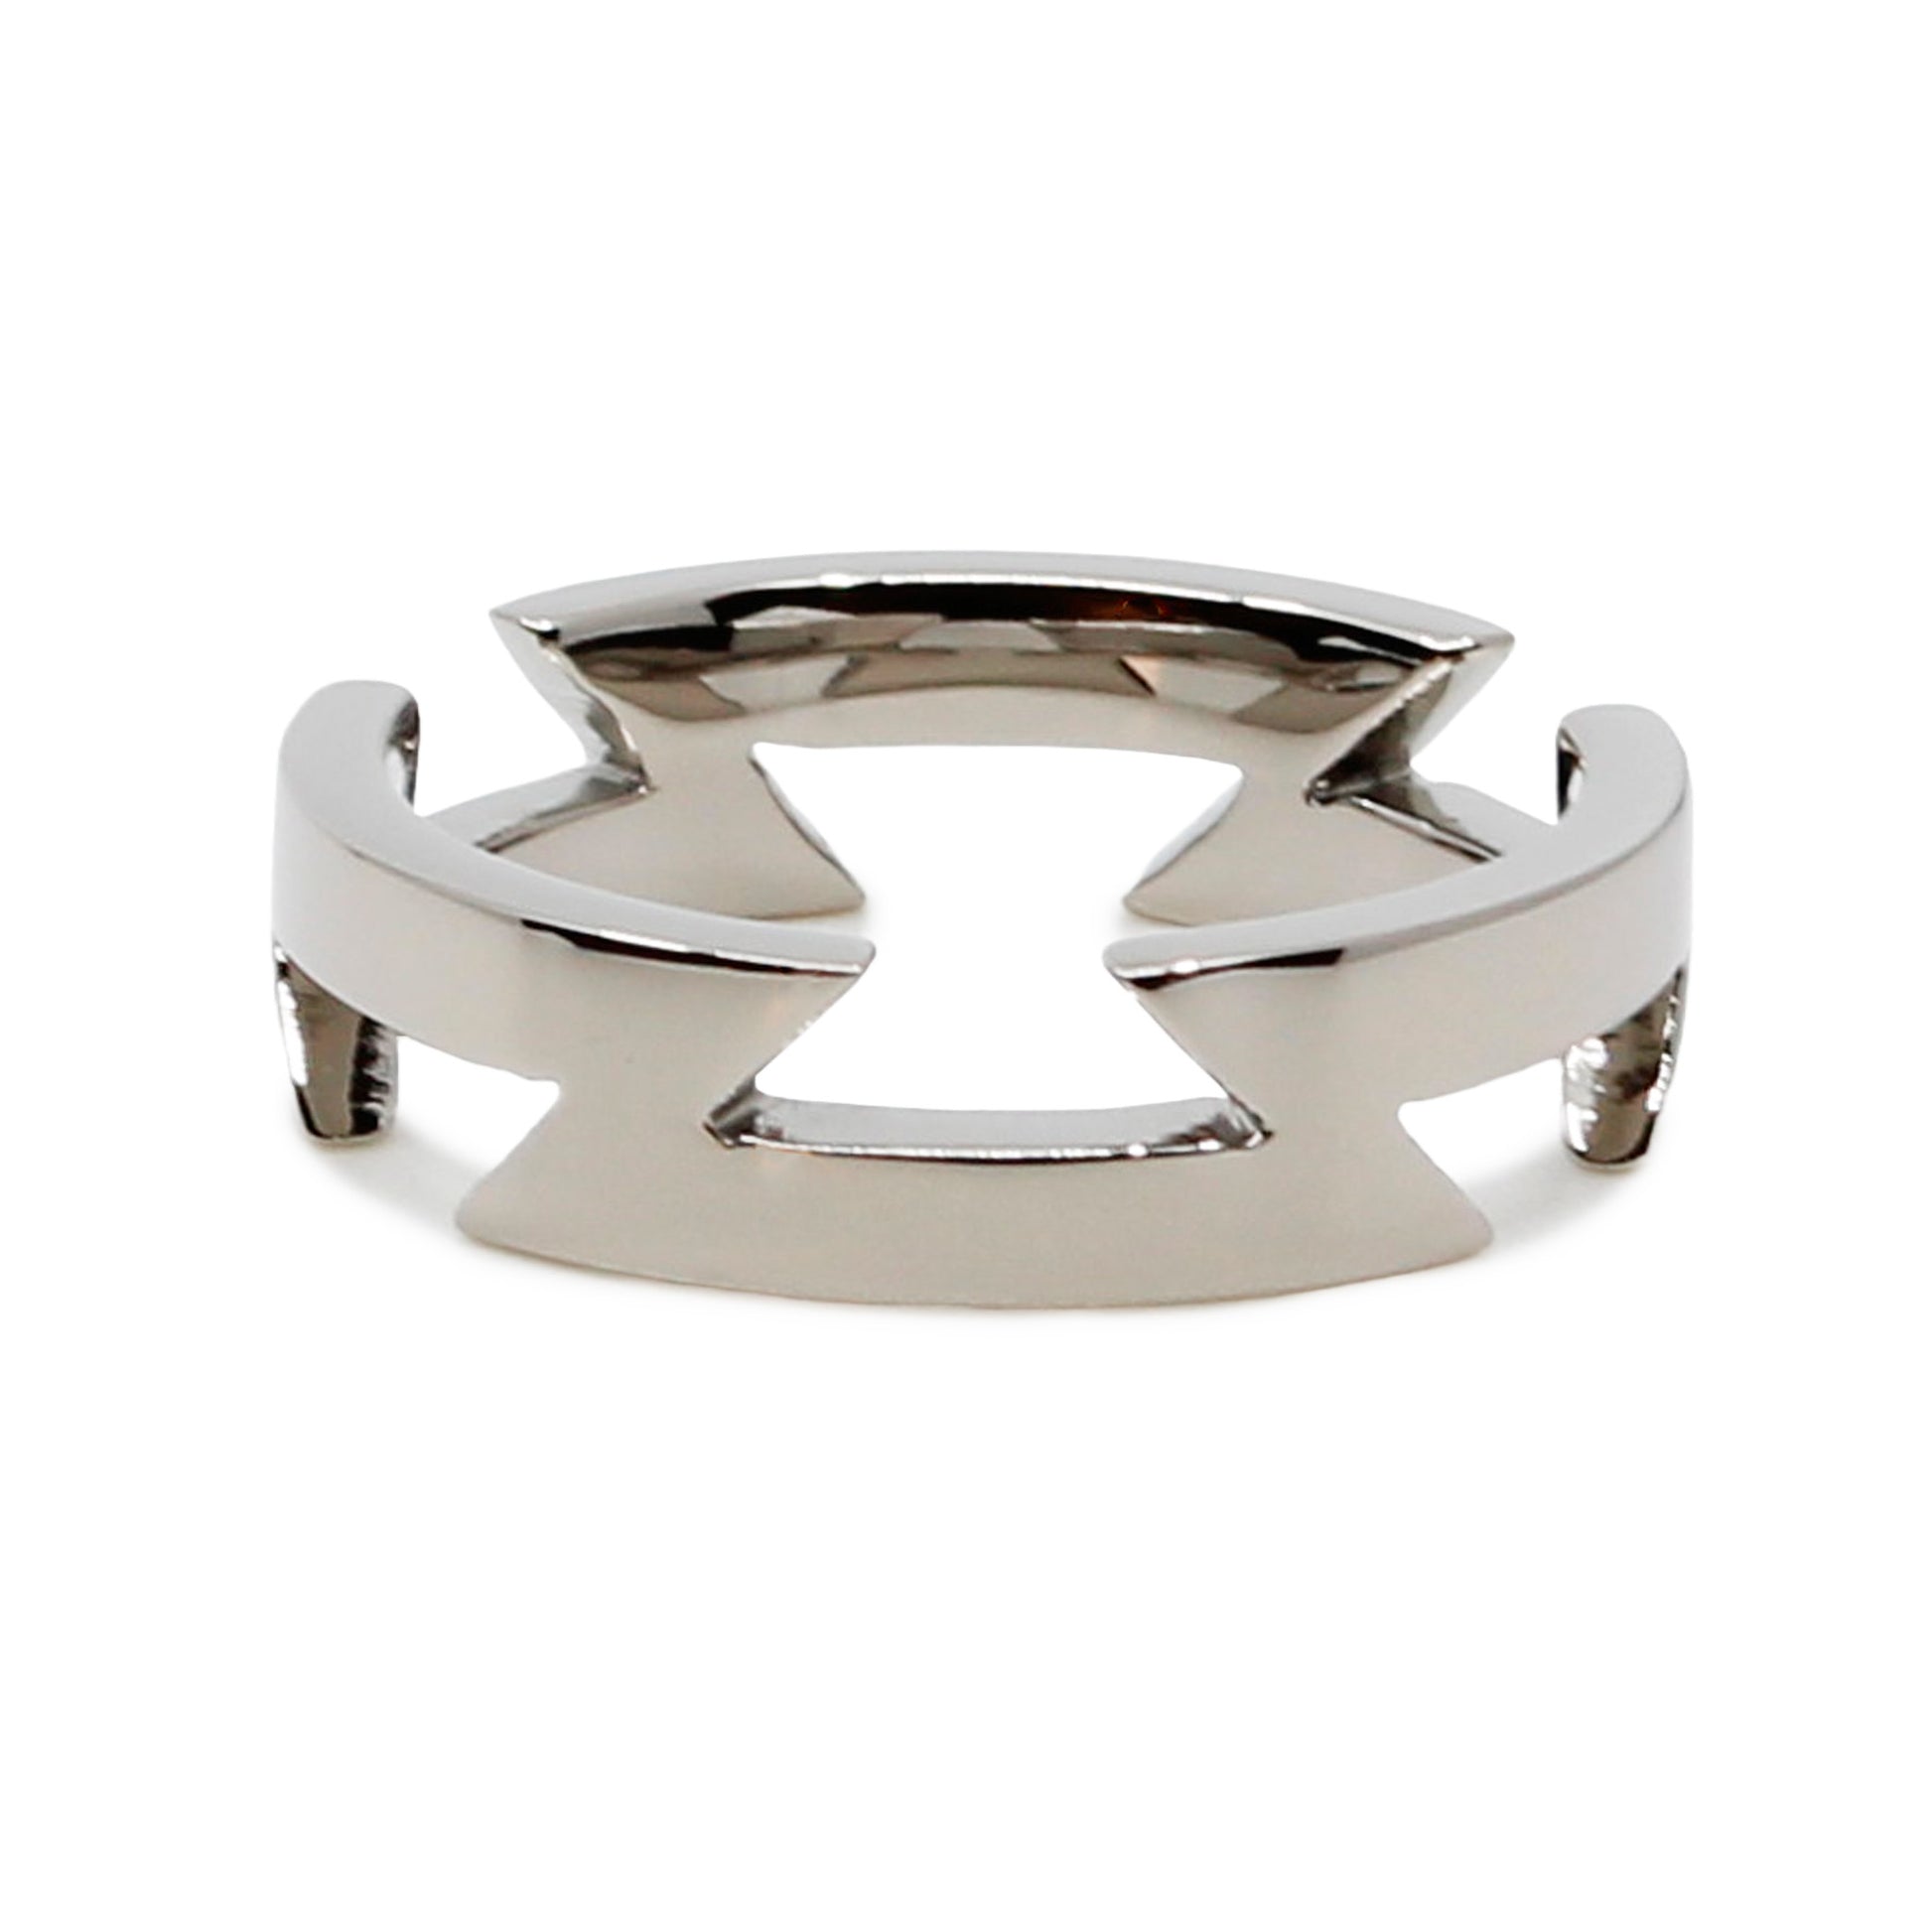 Single silver-colored titanium ring with zig-zag pattern, 6 mm thick. Image shows back view of the ring.